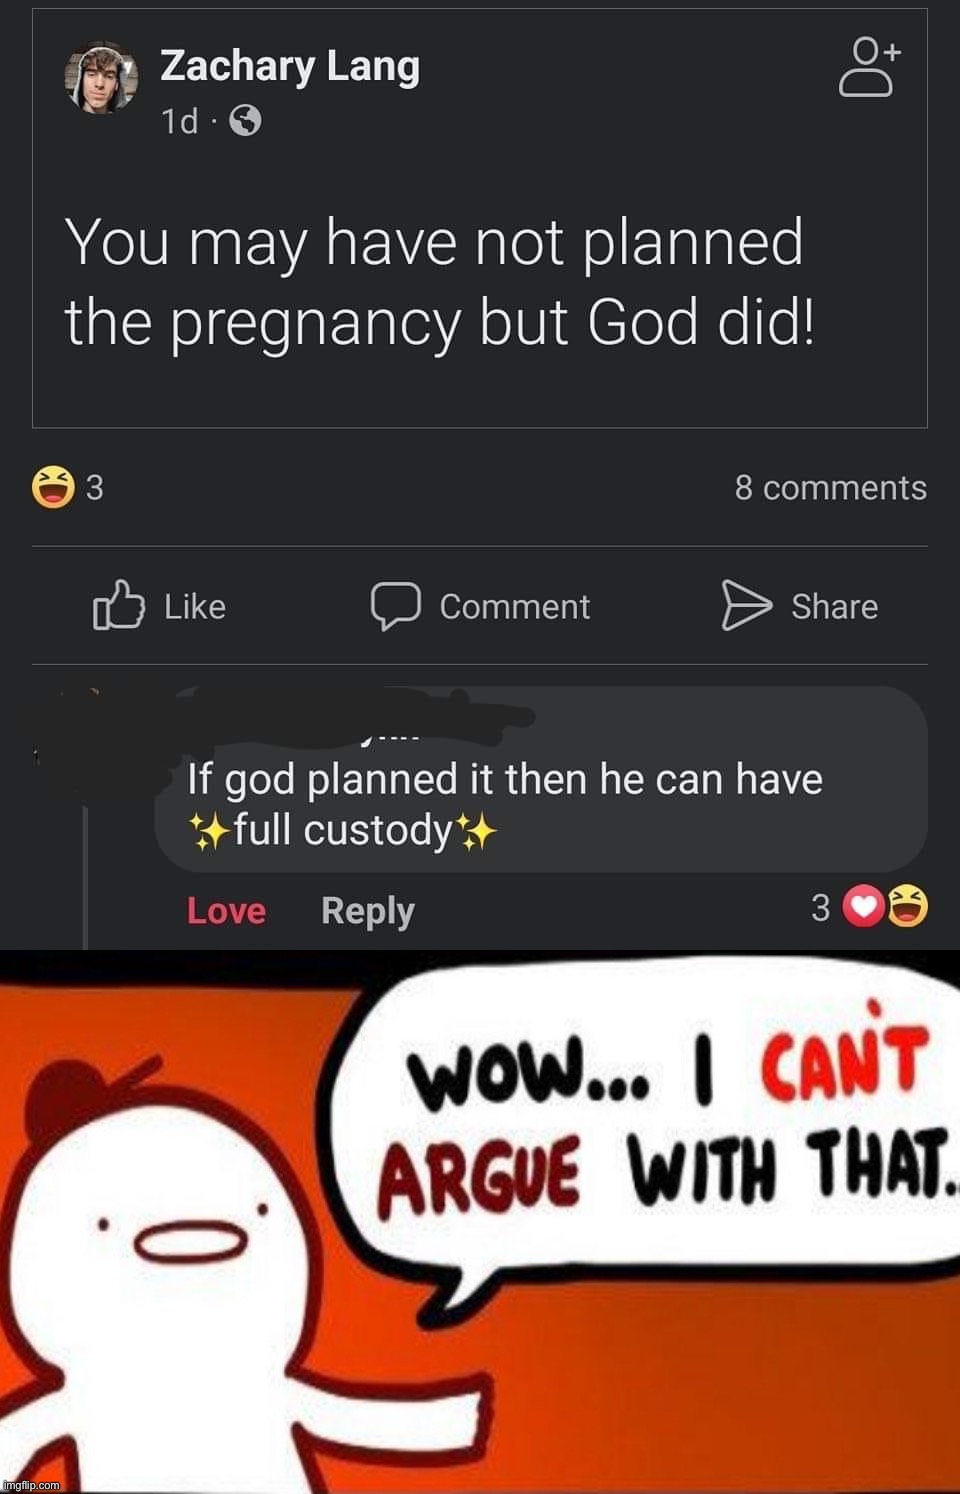 Return to sender  | image tagged in if god planned it then he can have full custody,can't argue with that,return,to,sender,abortion | made w/ Imgflip meme maker